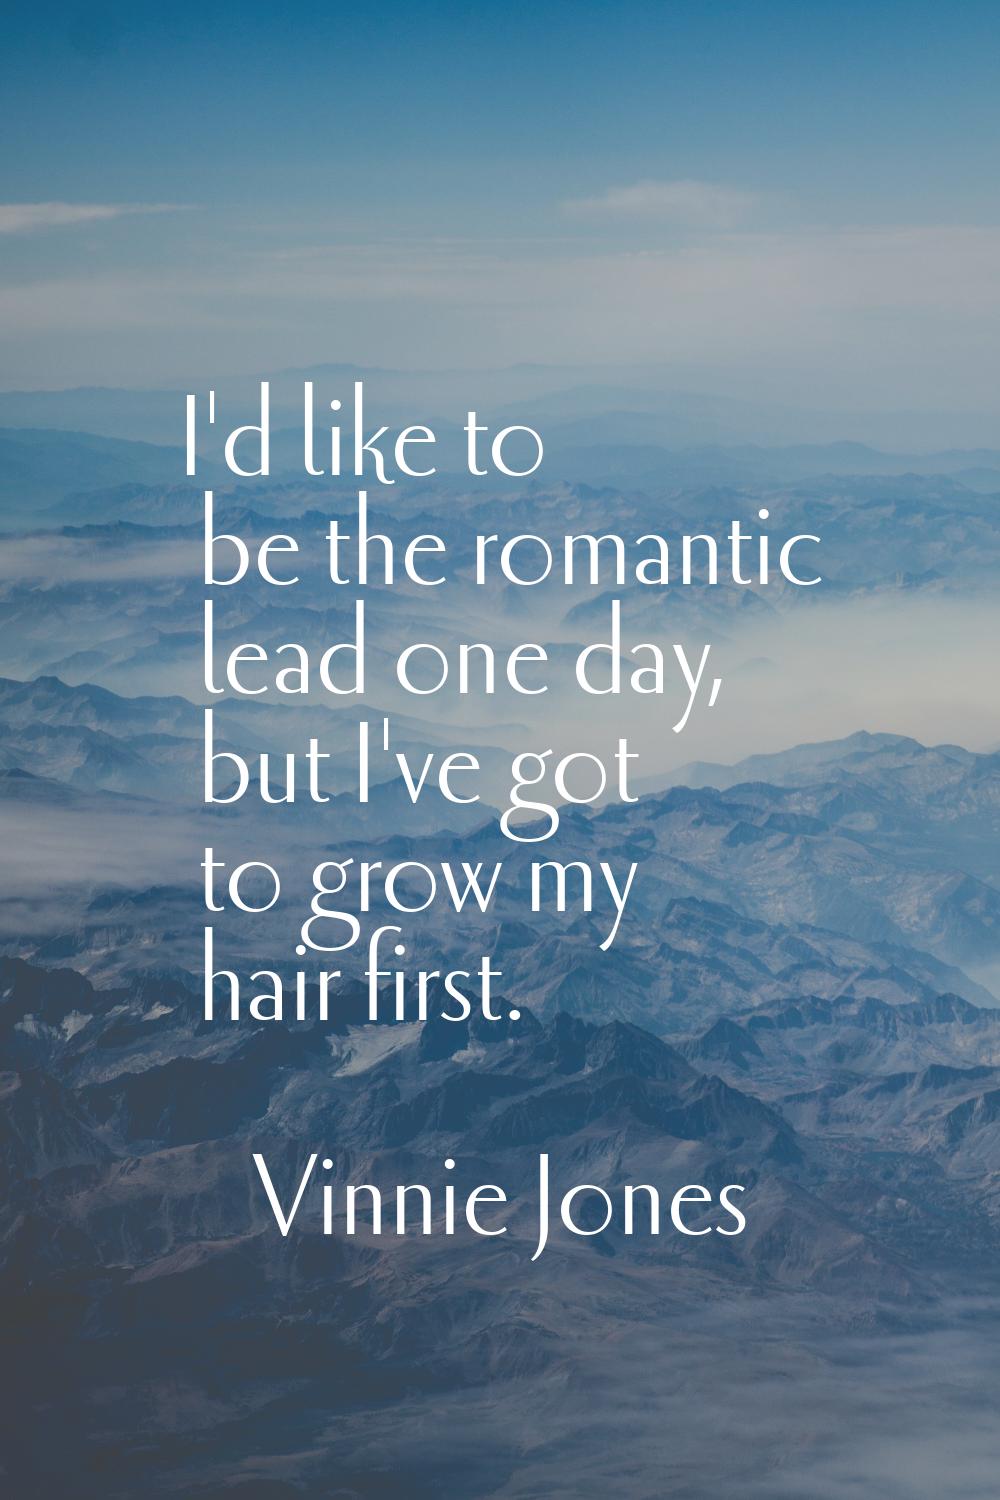 I'd like to be the romantic lead one day, but I've got to grow my hair first.